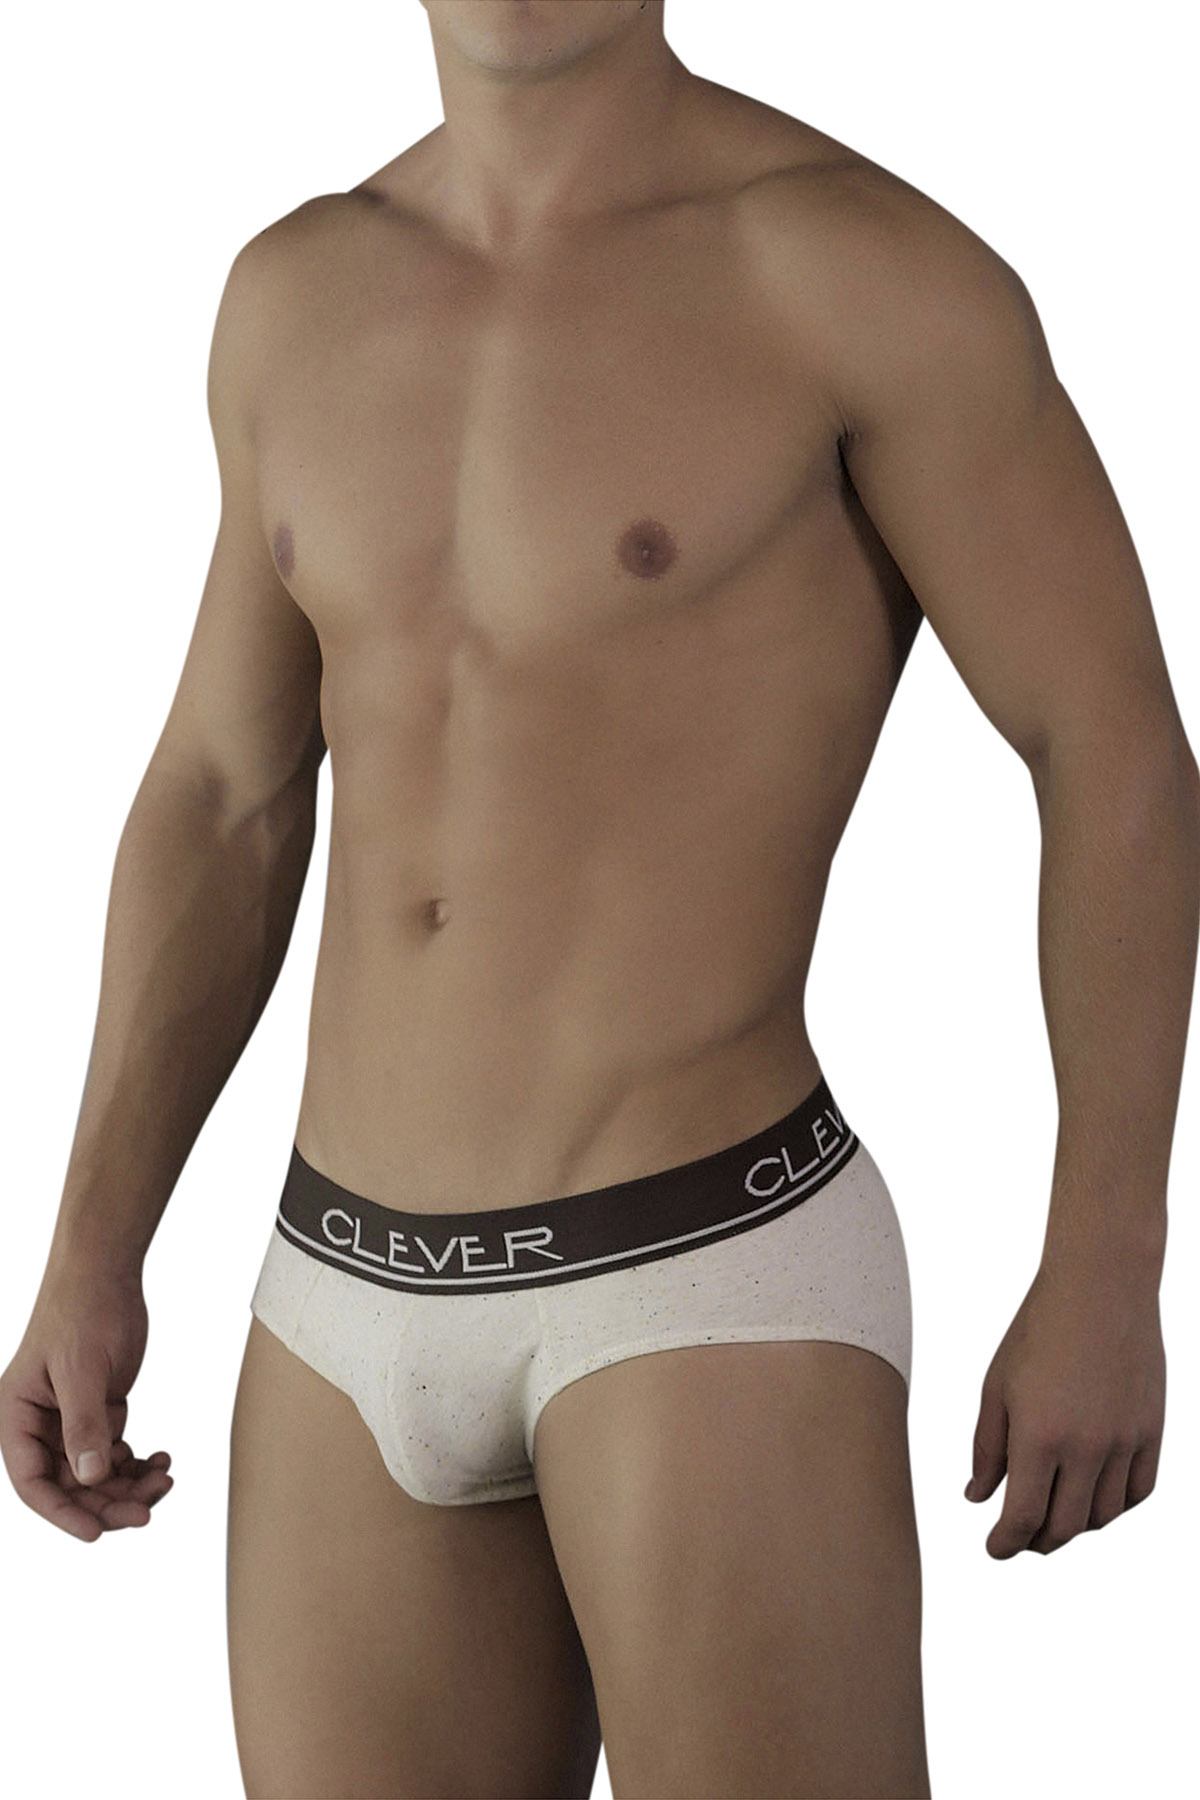 Clever Limited Edition Cream/Speckled Latin Brief 509991